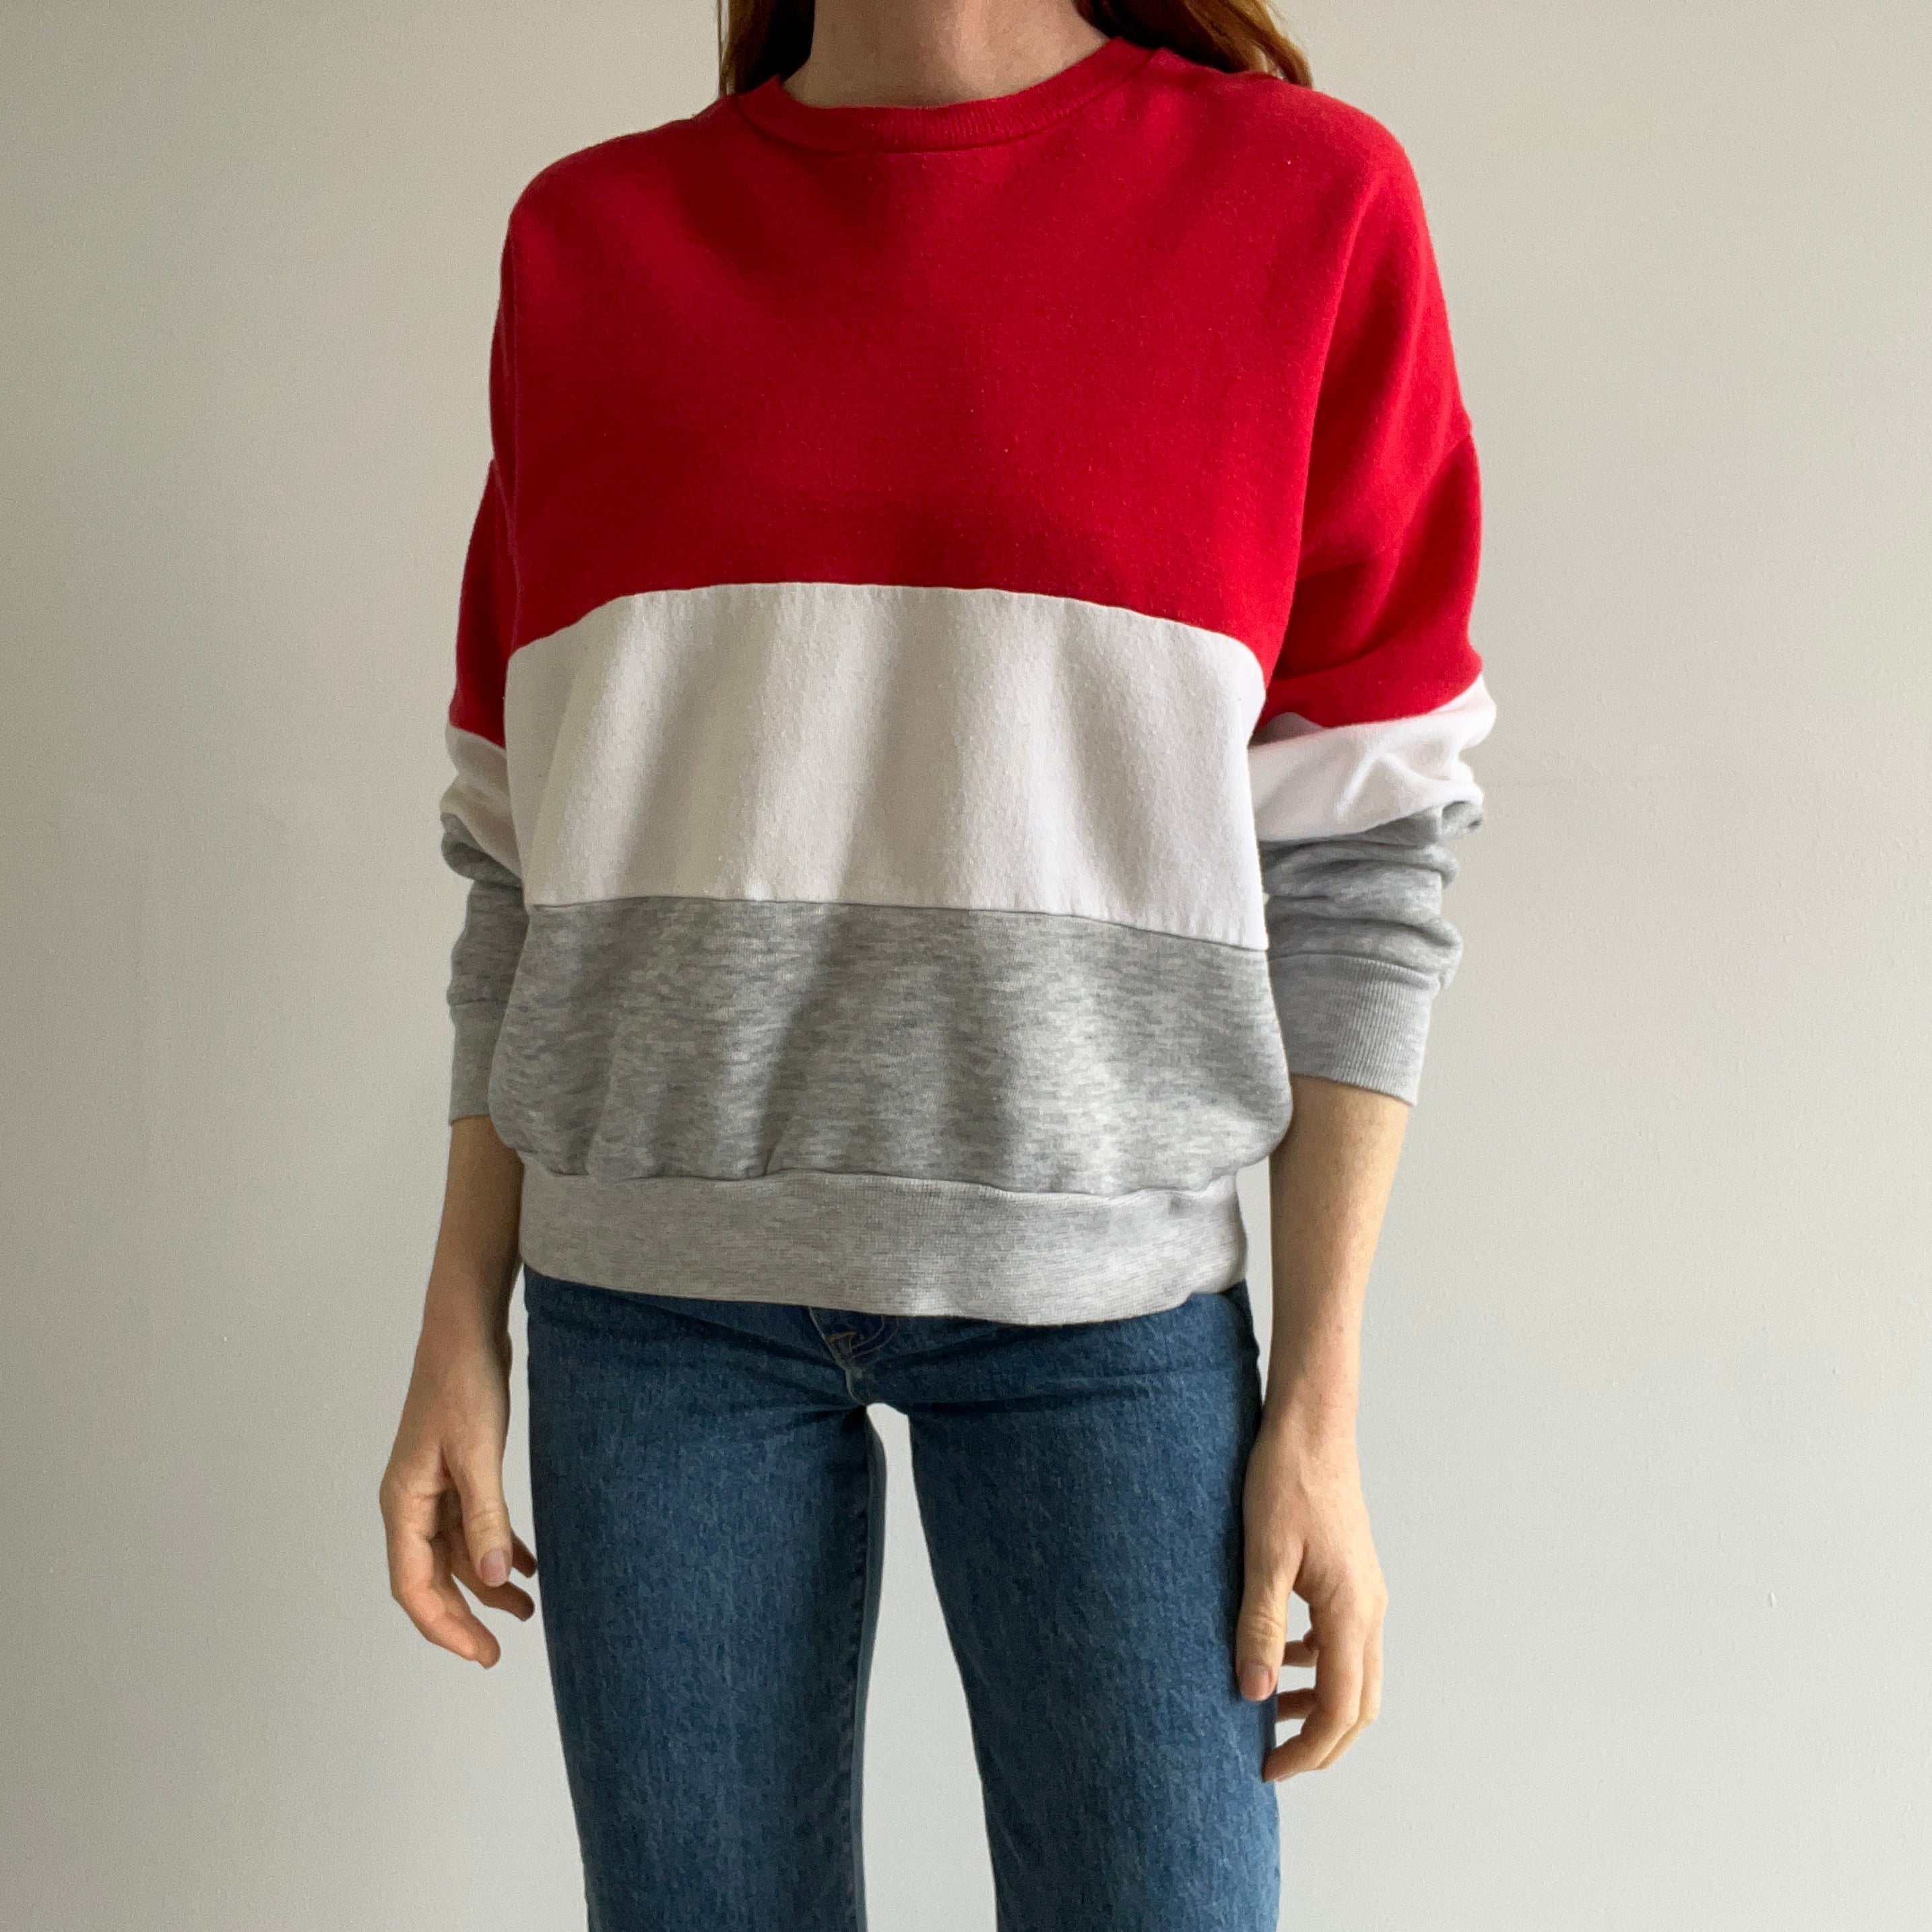 1980s Color Block Red, White and Gray by Bassett Walker !!!!!!!!!